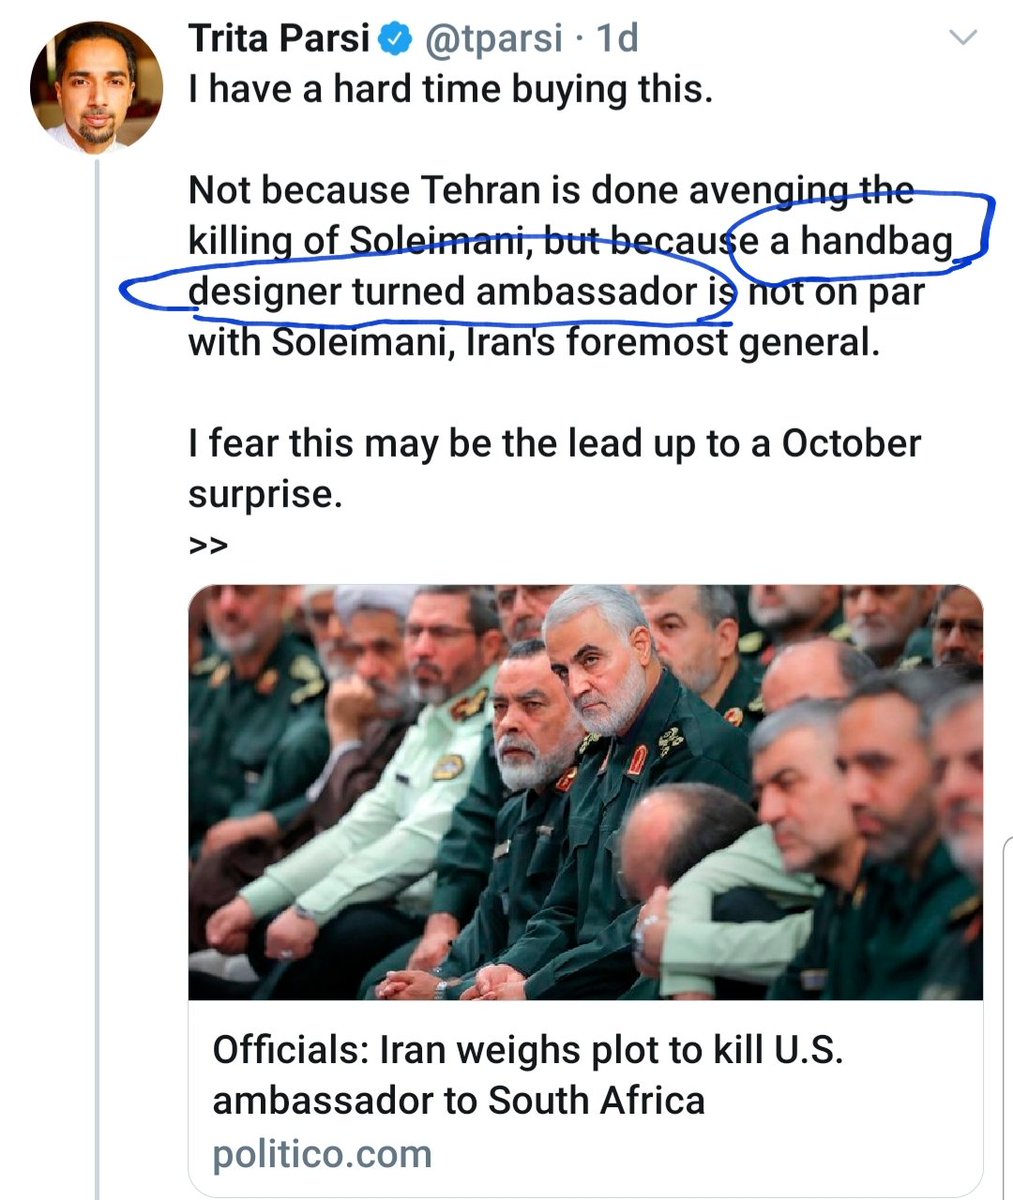 THREAD1/ How do you spot an apologist for the Iranian regime? These ppl have been welcomed in America, yet when faced with this intelligence report of a planned attack, their first instinct is to mock the US ambassador (a ditzy "handbag designer") & promote the IRI's narrative.